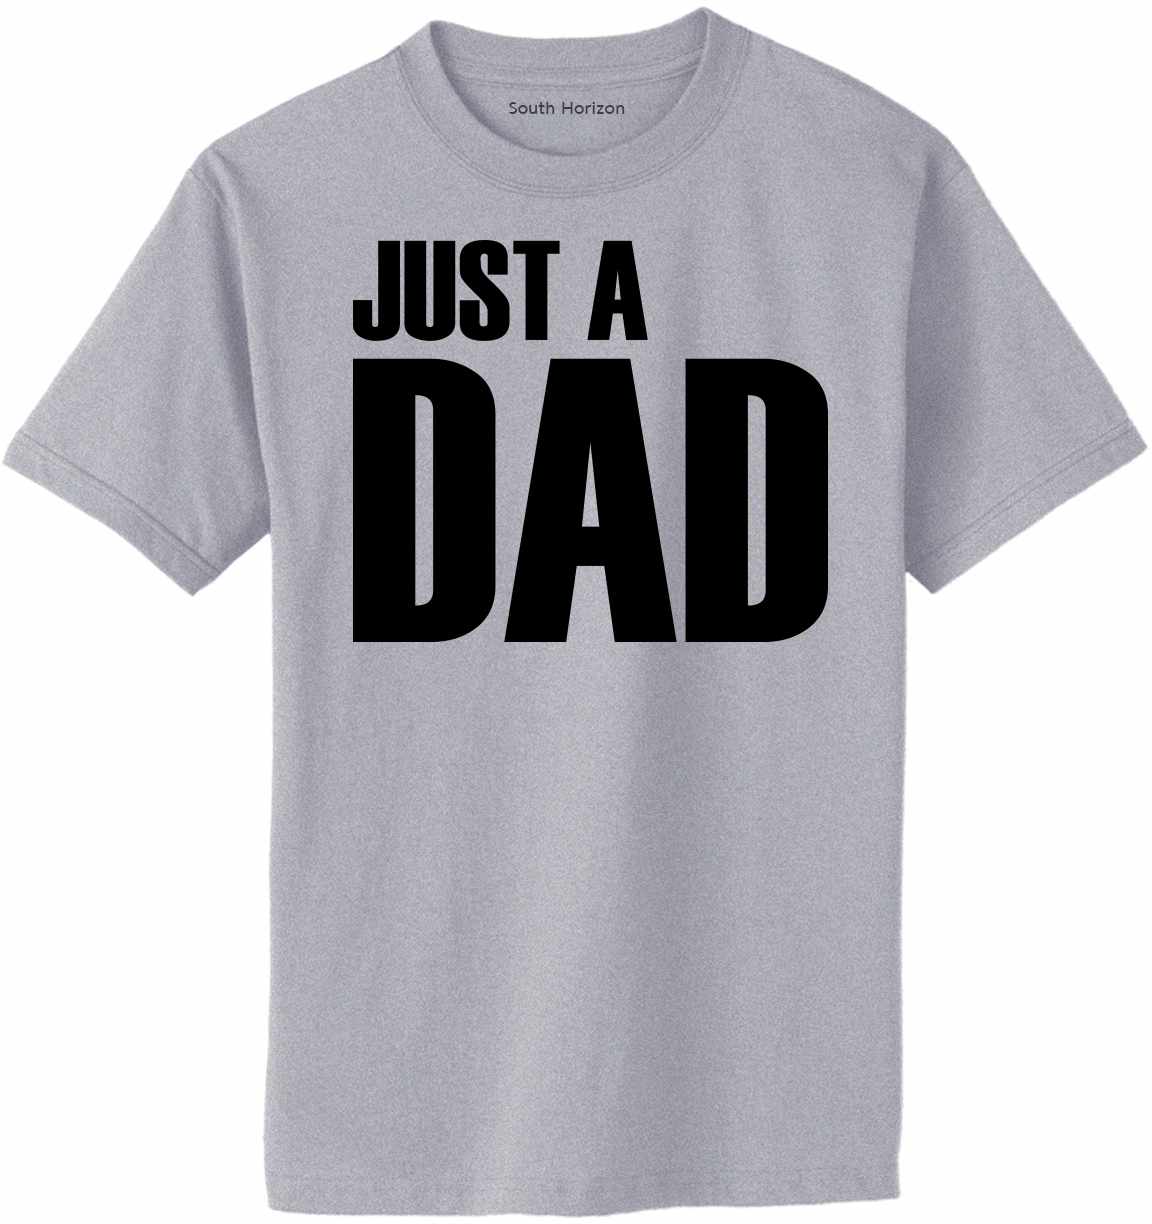 Just A Dad on Adult T-Shirt (#1296-1)